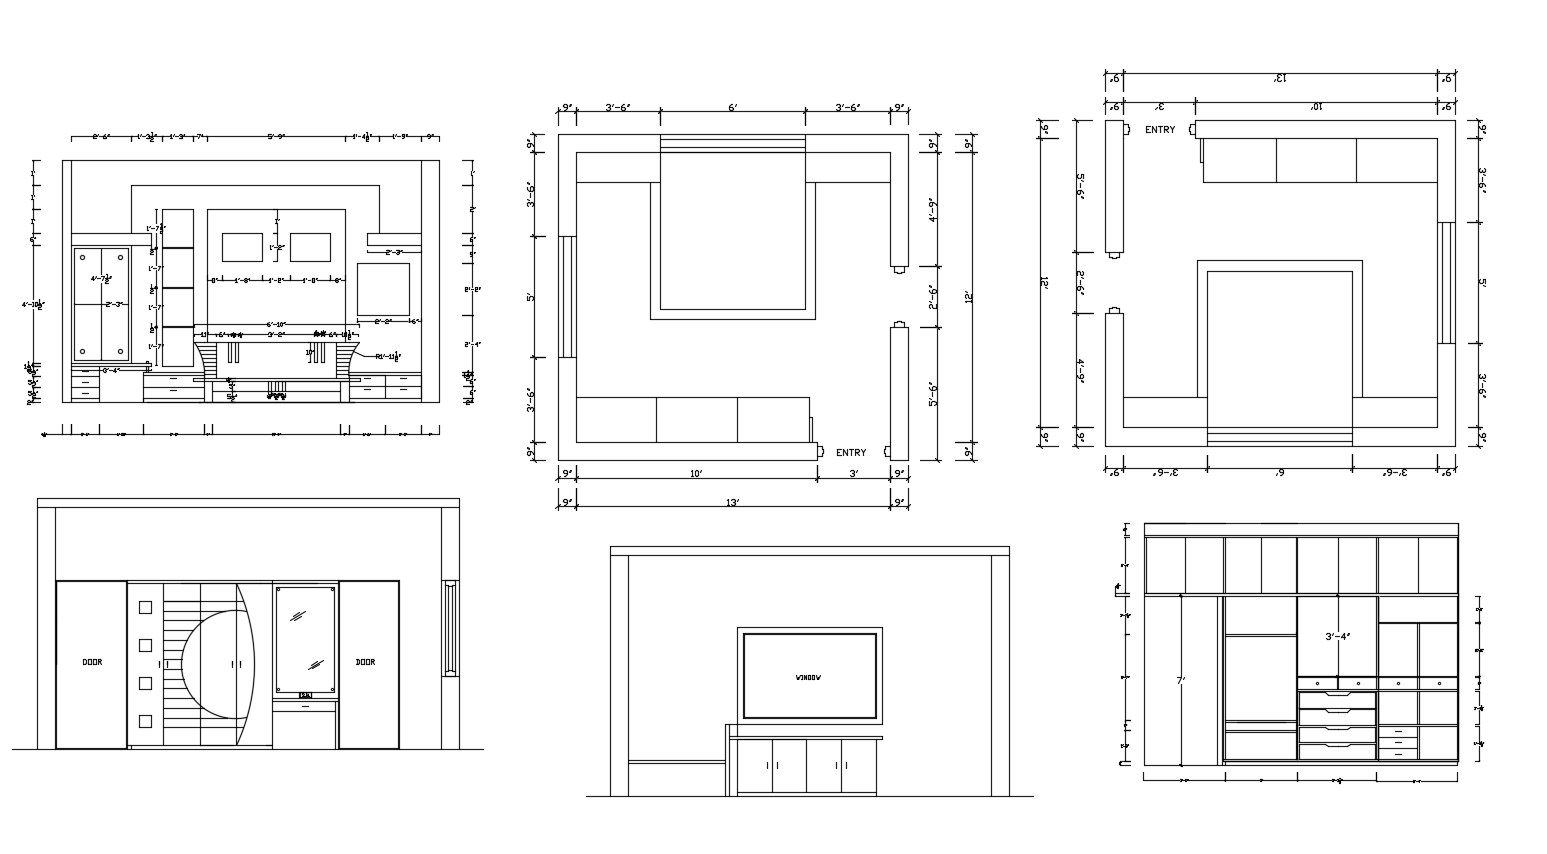 Master bedroom layout in autocad with elevation Cadbull